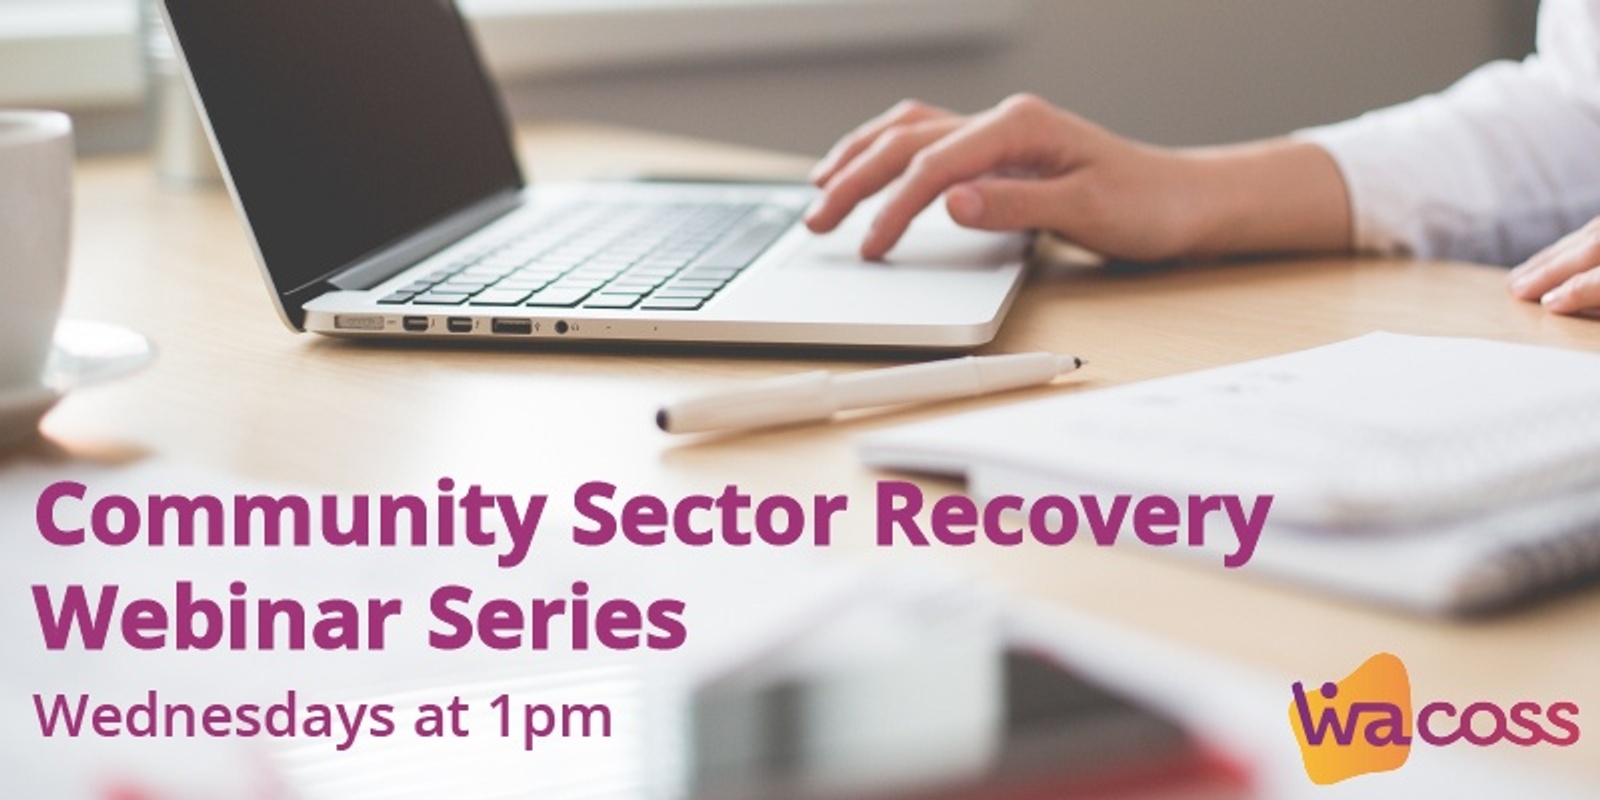 Banner image for Community Sector Recovery Webinar Series Wednesdays at 1pm